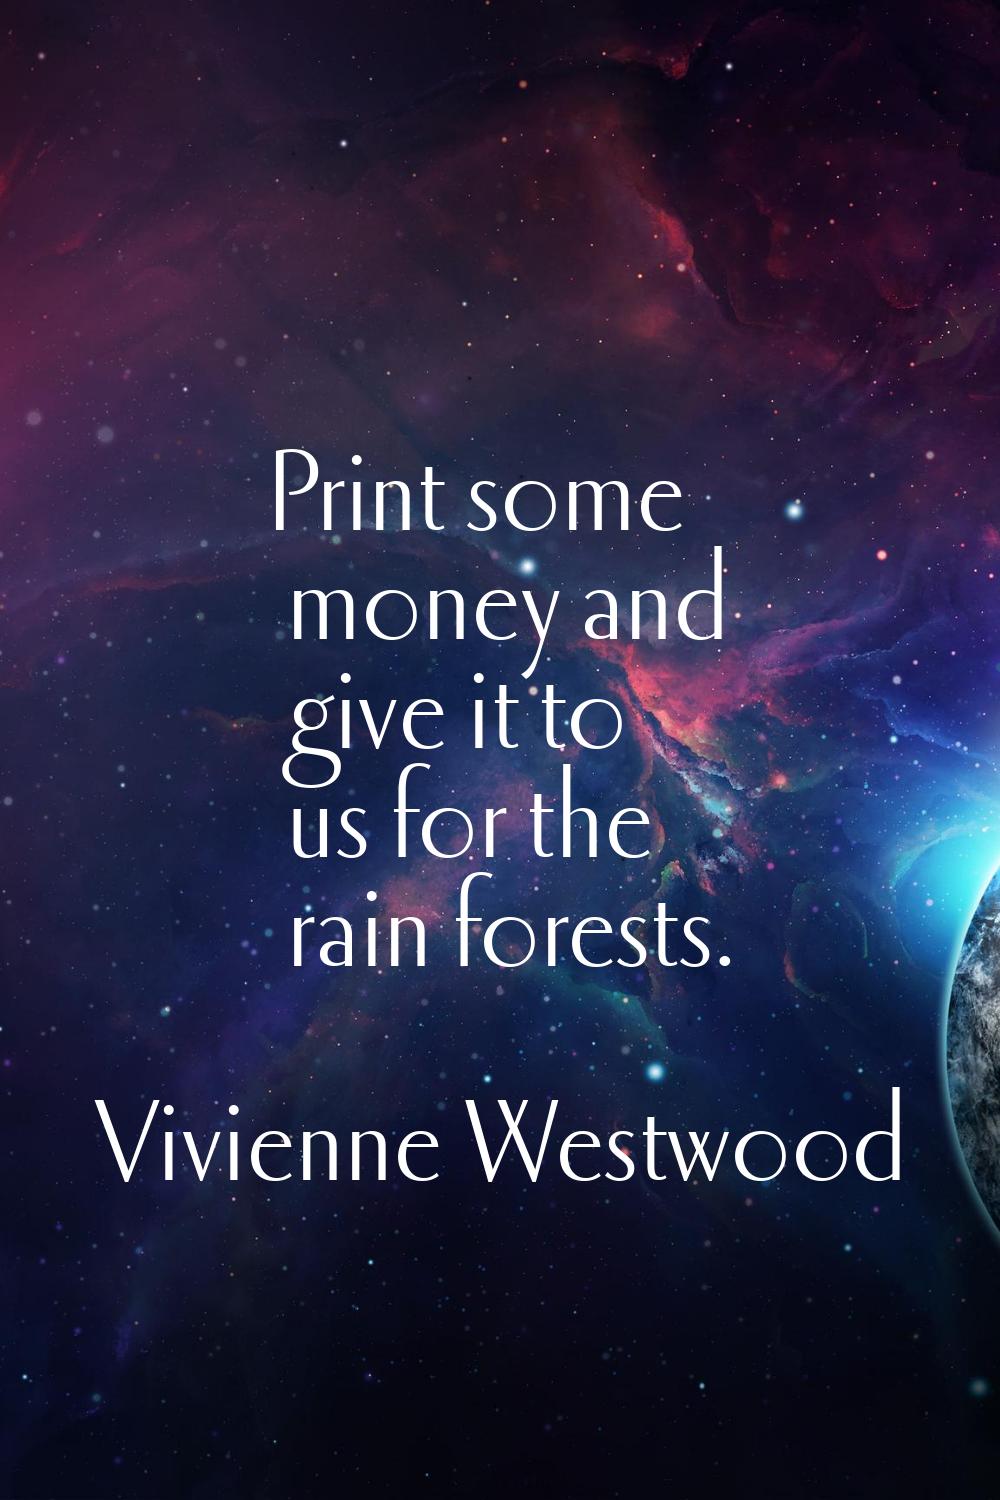 Print some money and give it to us for the rain forests.